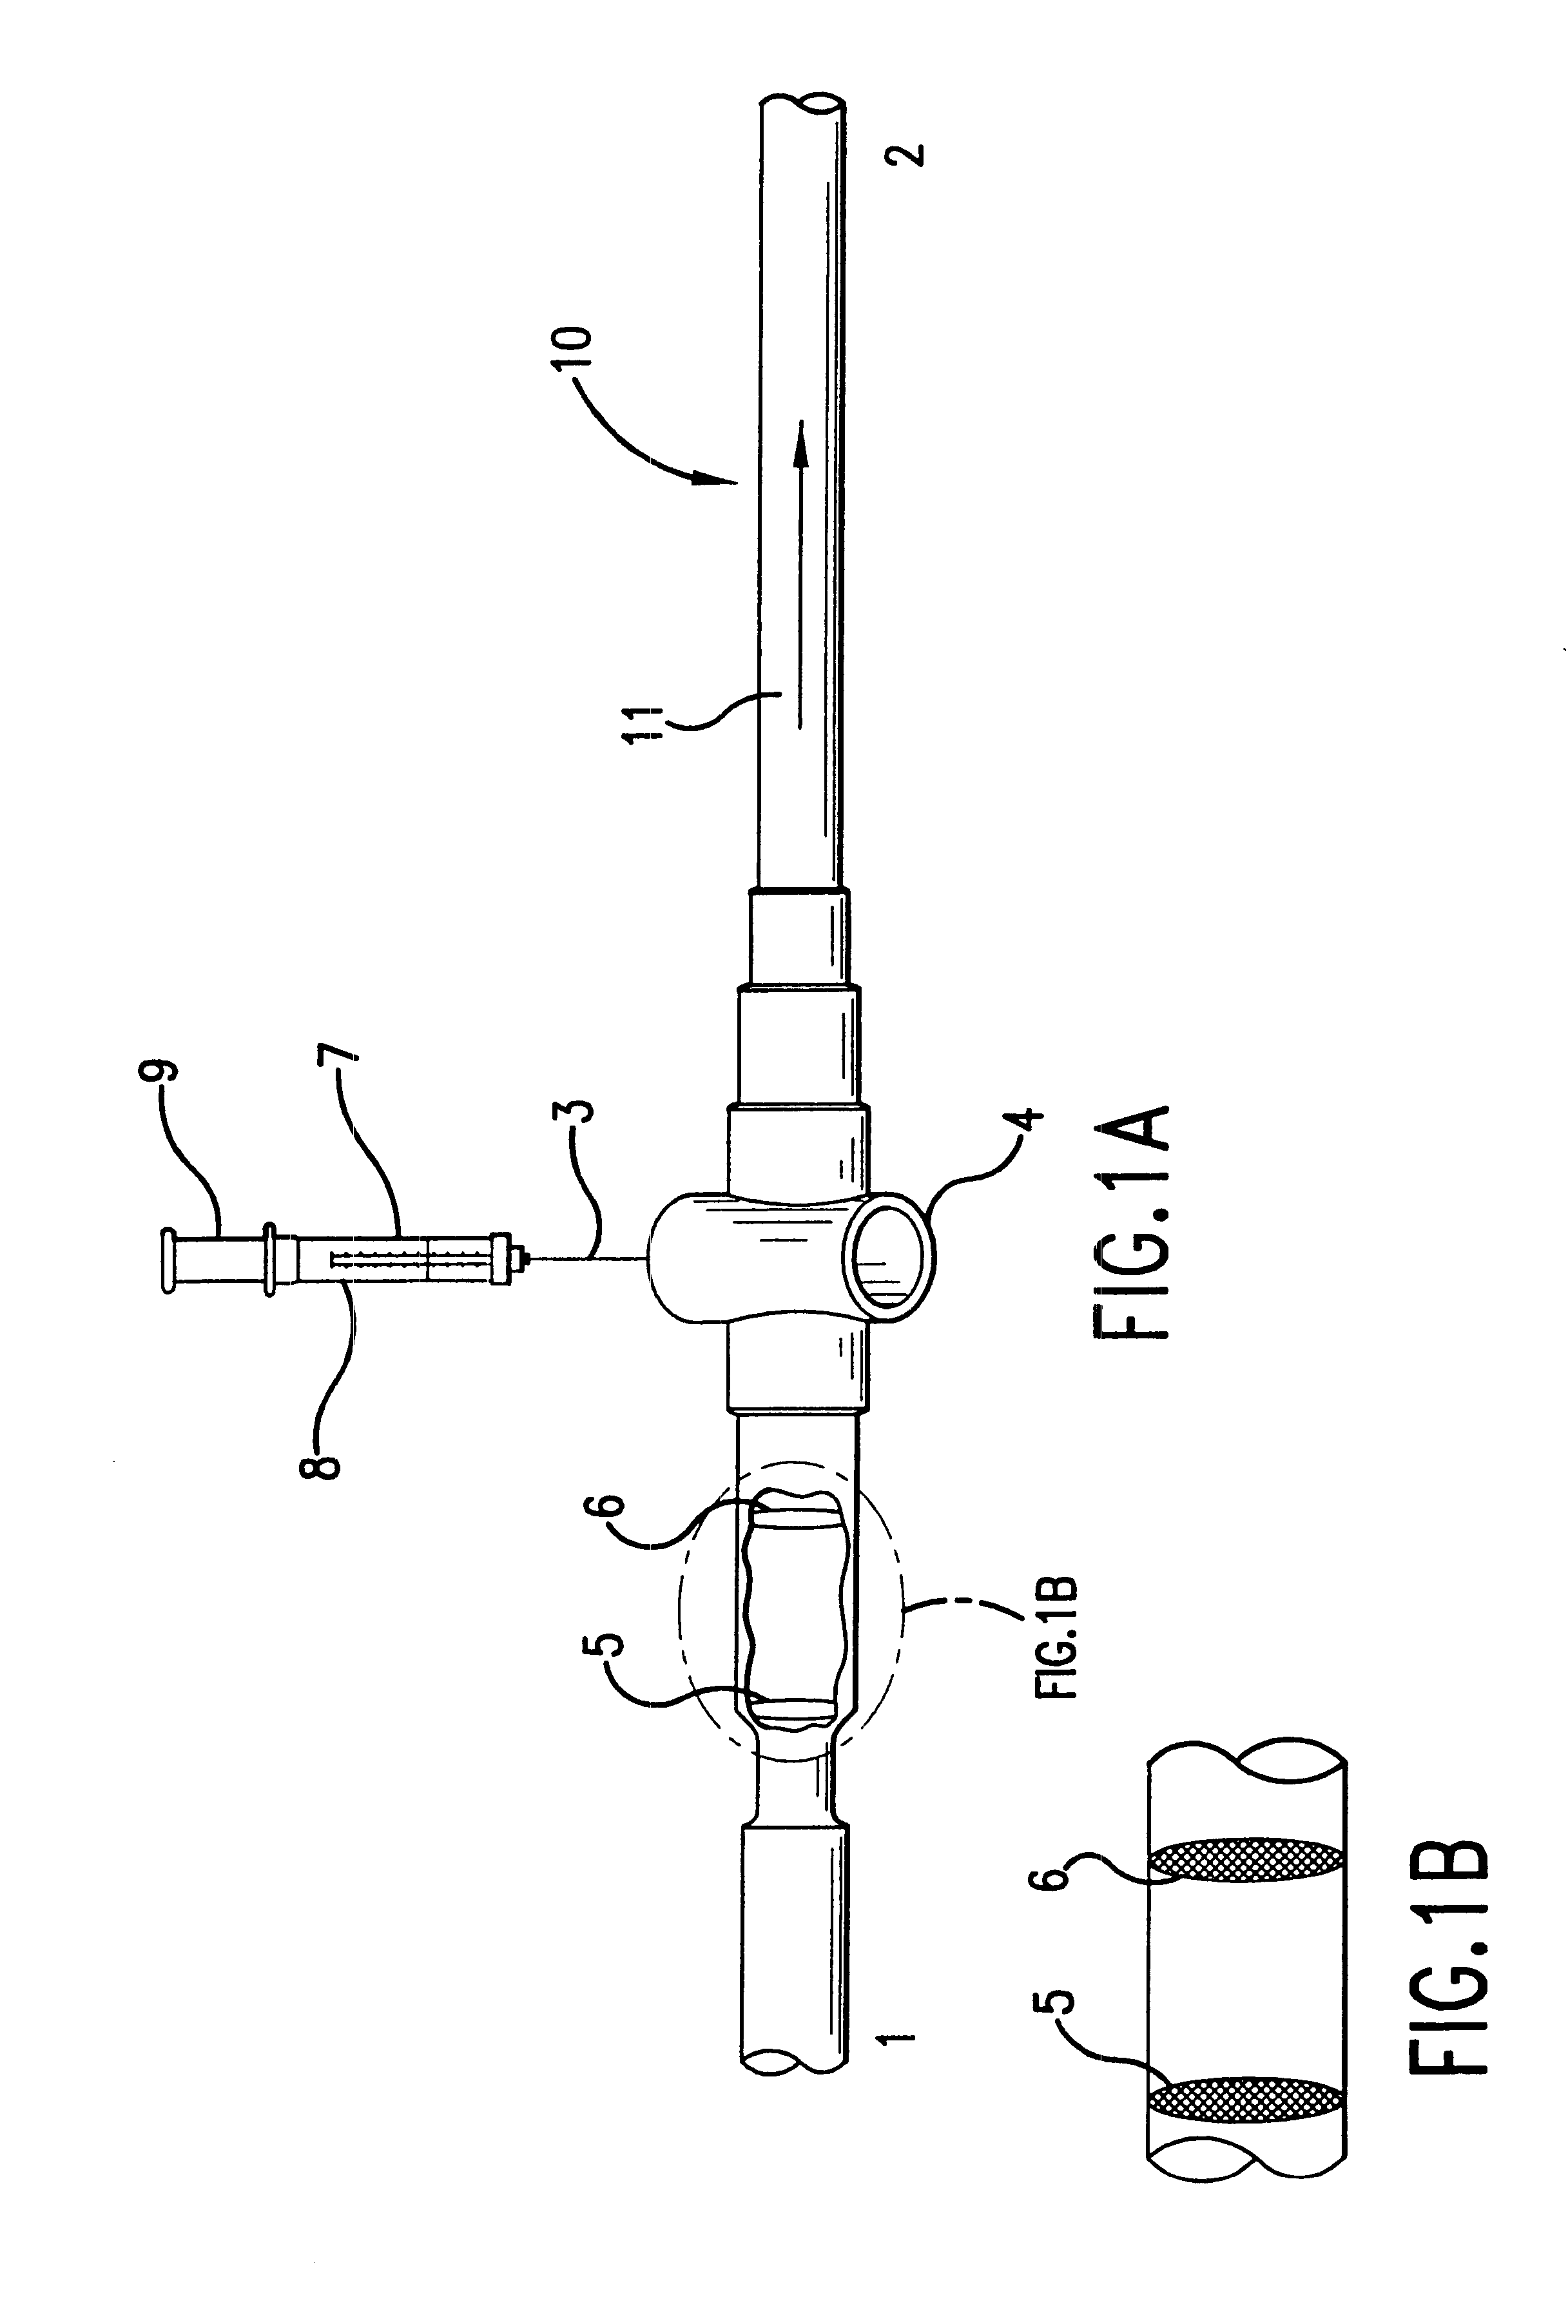 Apparatus and method for generating moisture standards in gases